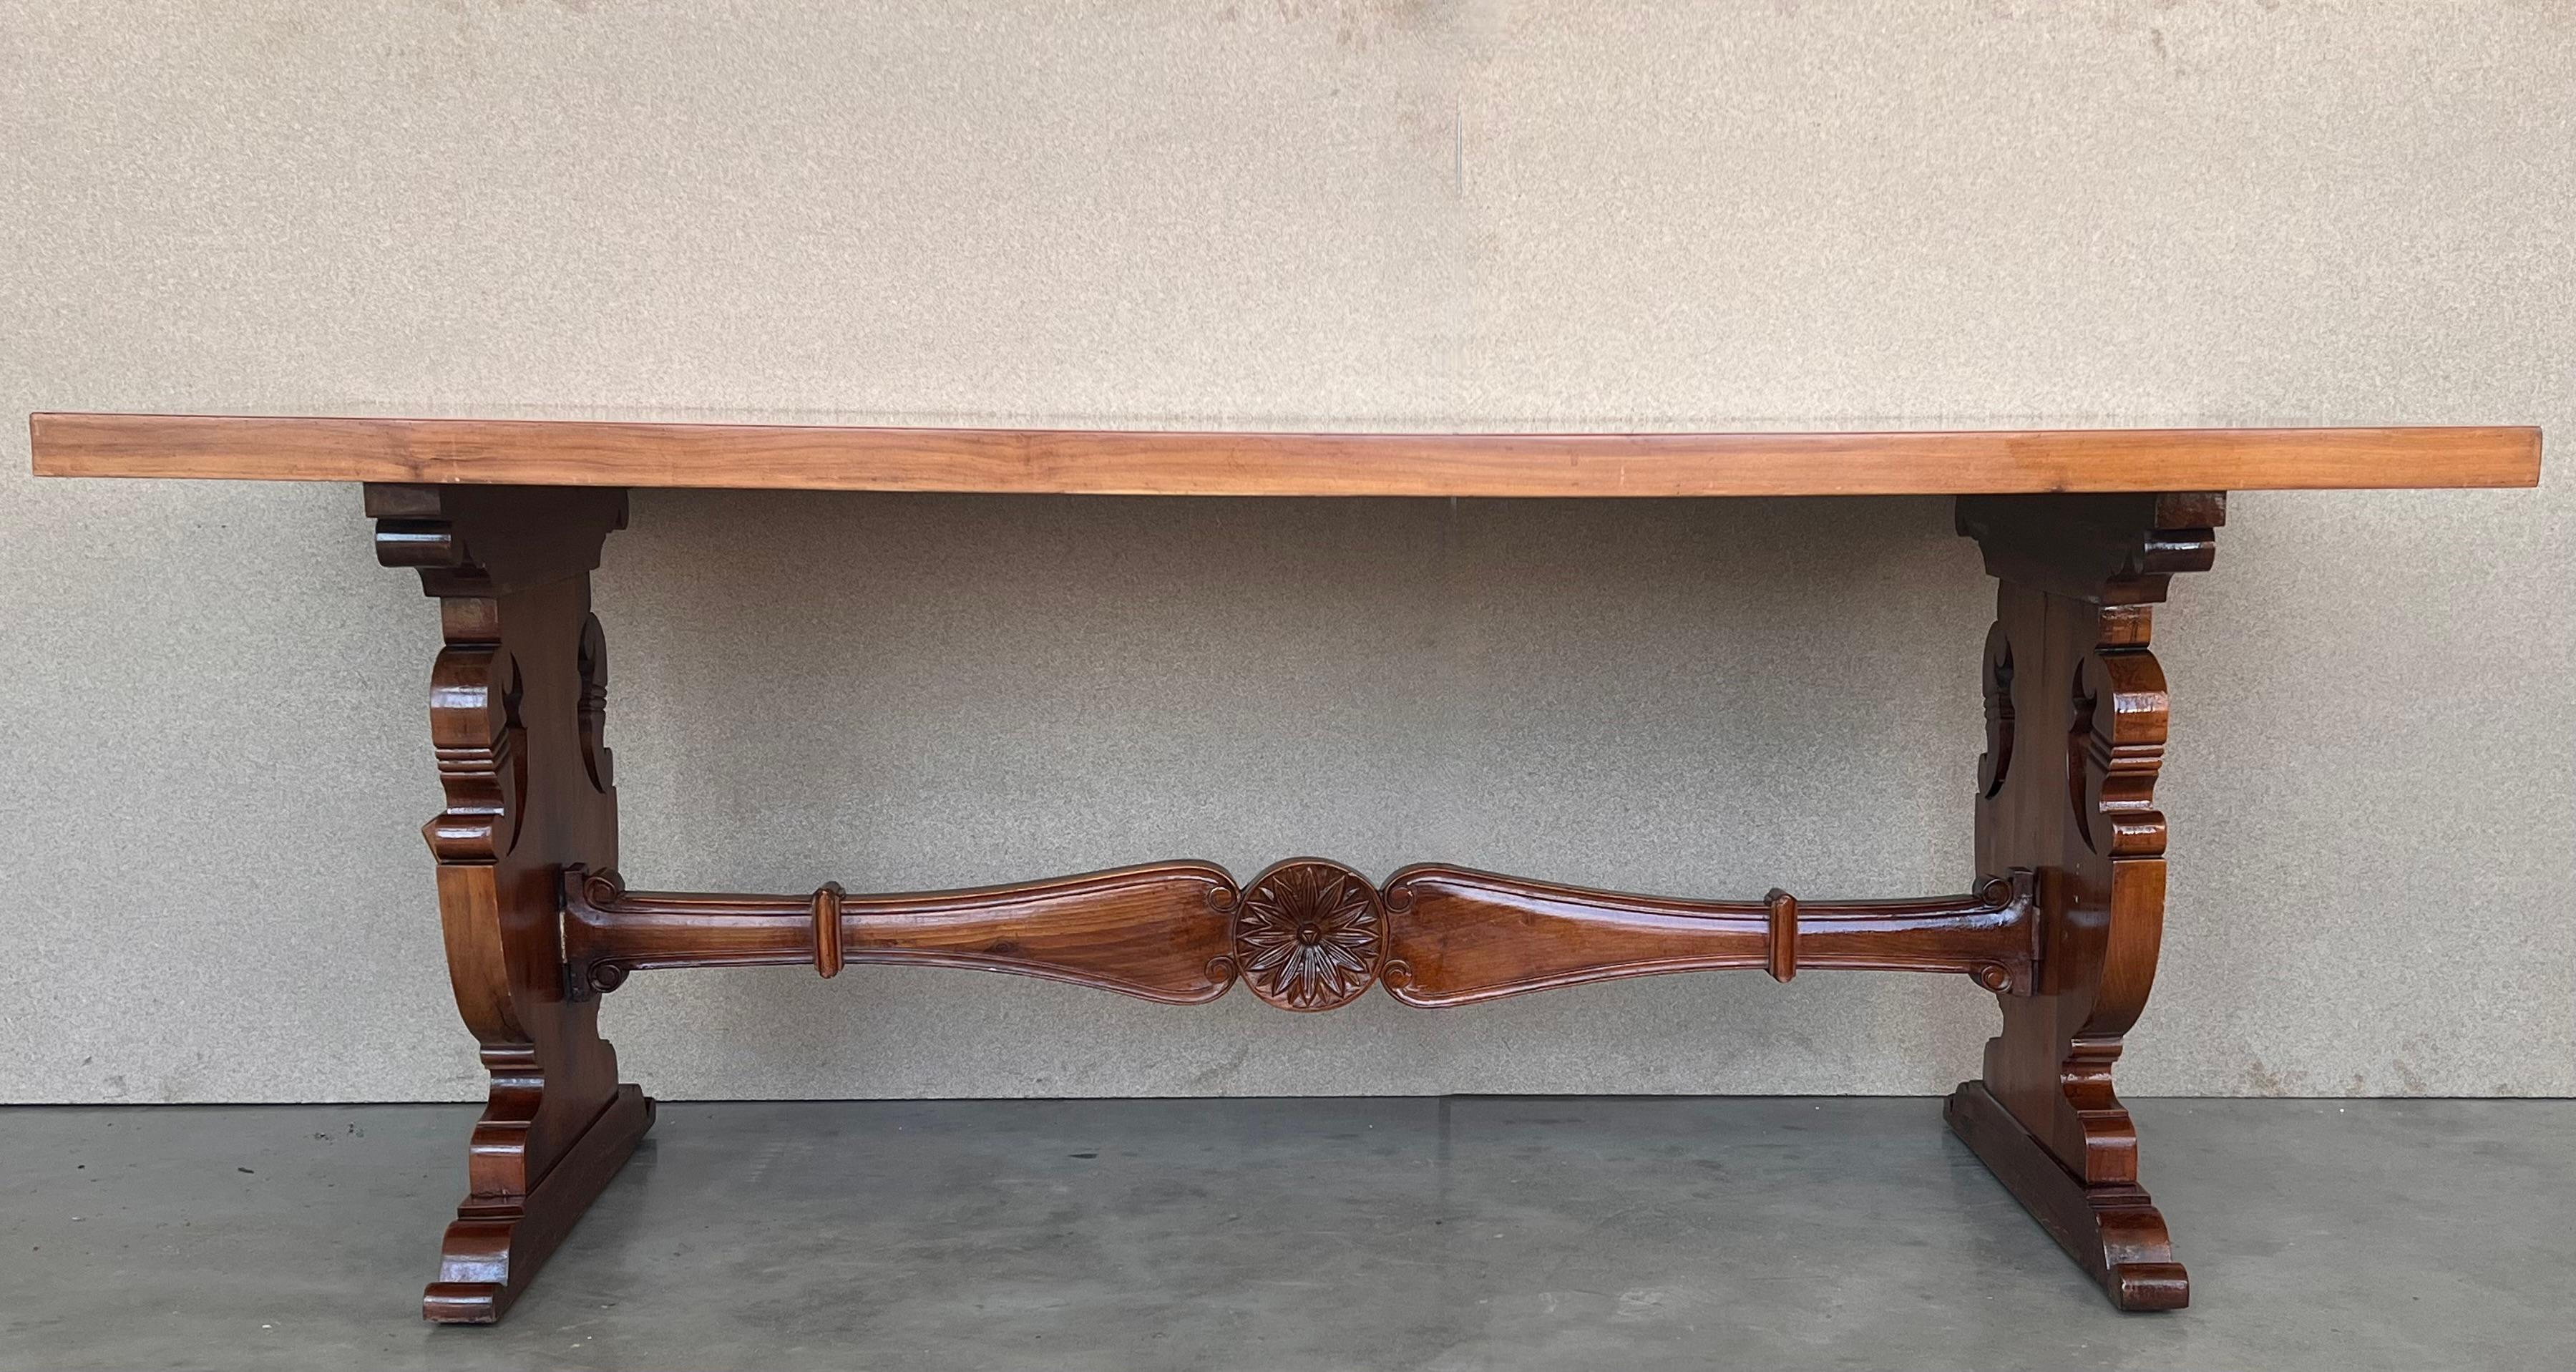 A monumental 20th century Spanish trestle table, having a rectangular framed solid walnut inset board top, resting on hand carved, classical pedestal lyre legs joined by a beautifully wood stretcher.

